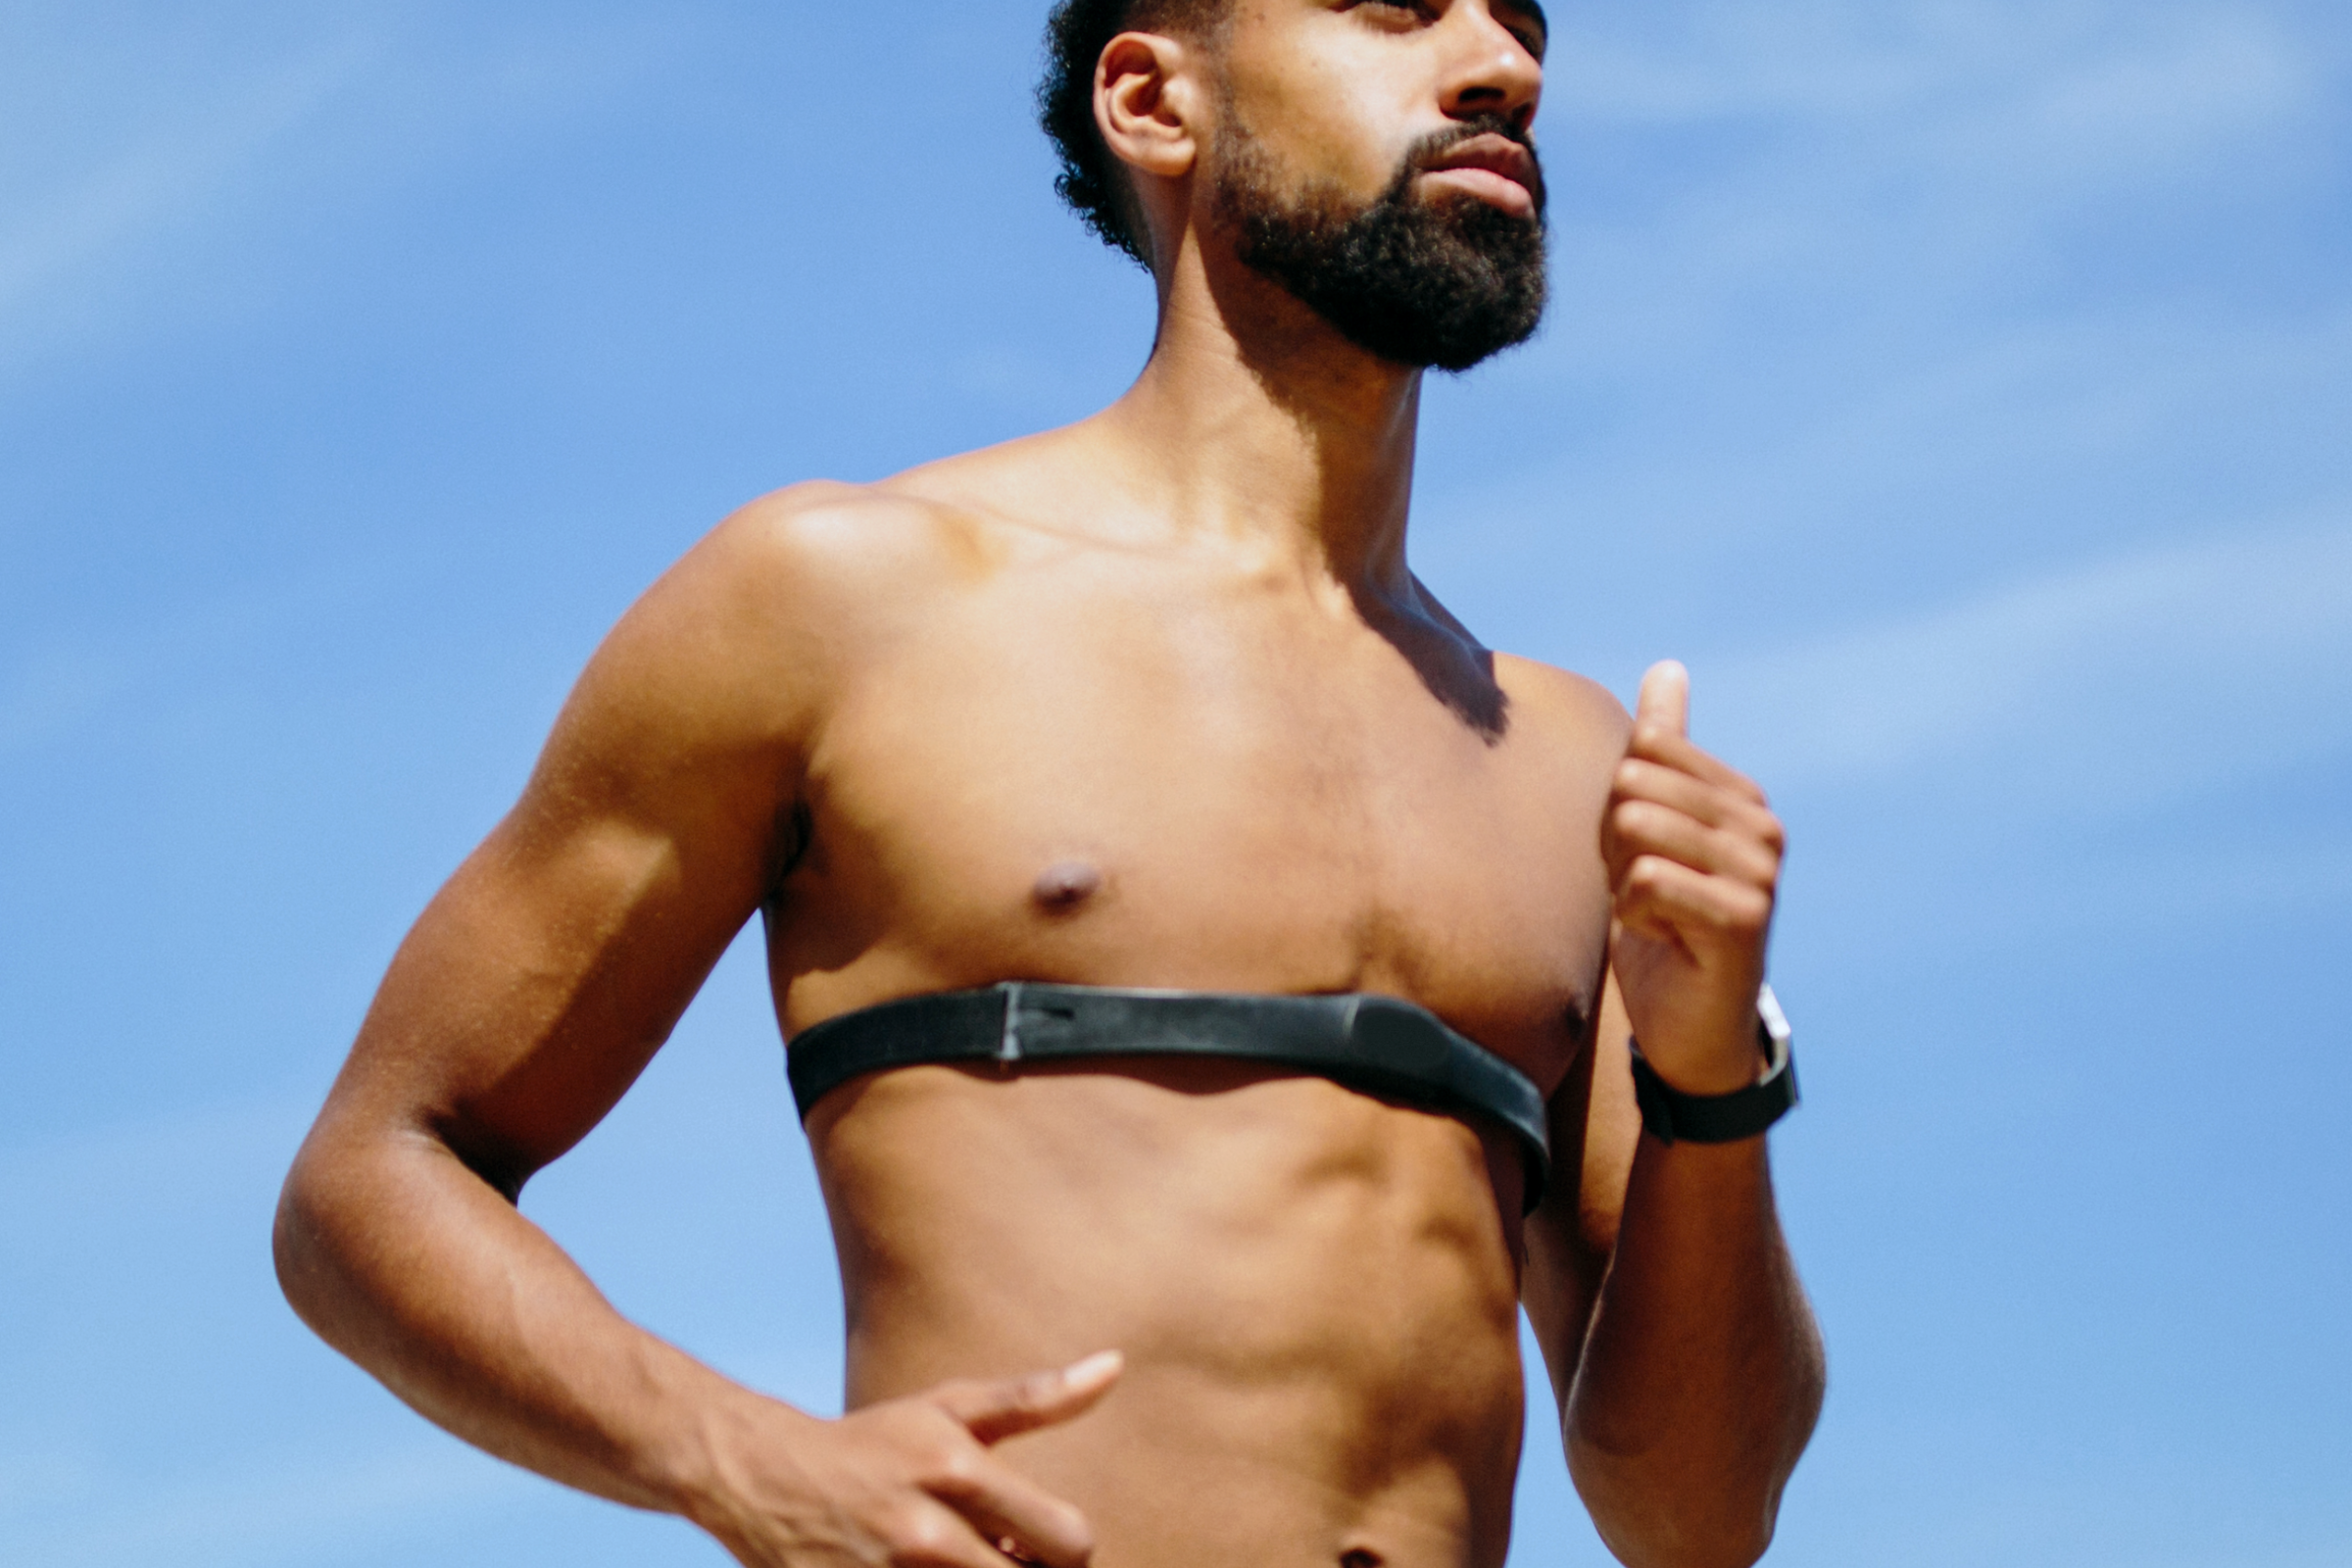 This smart 'man bra' is tracking college basketballers and Premier League  clubs - Wareable